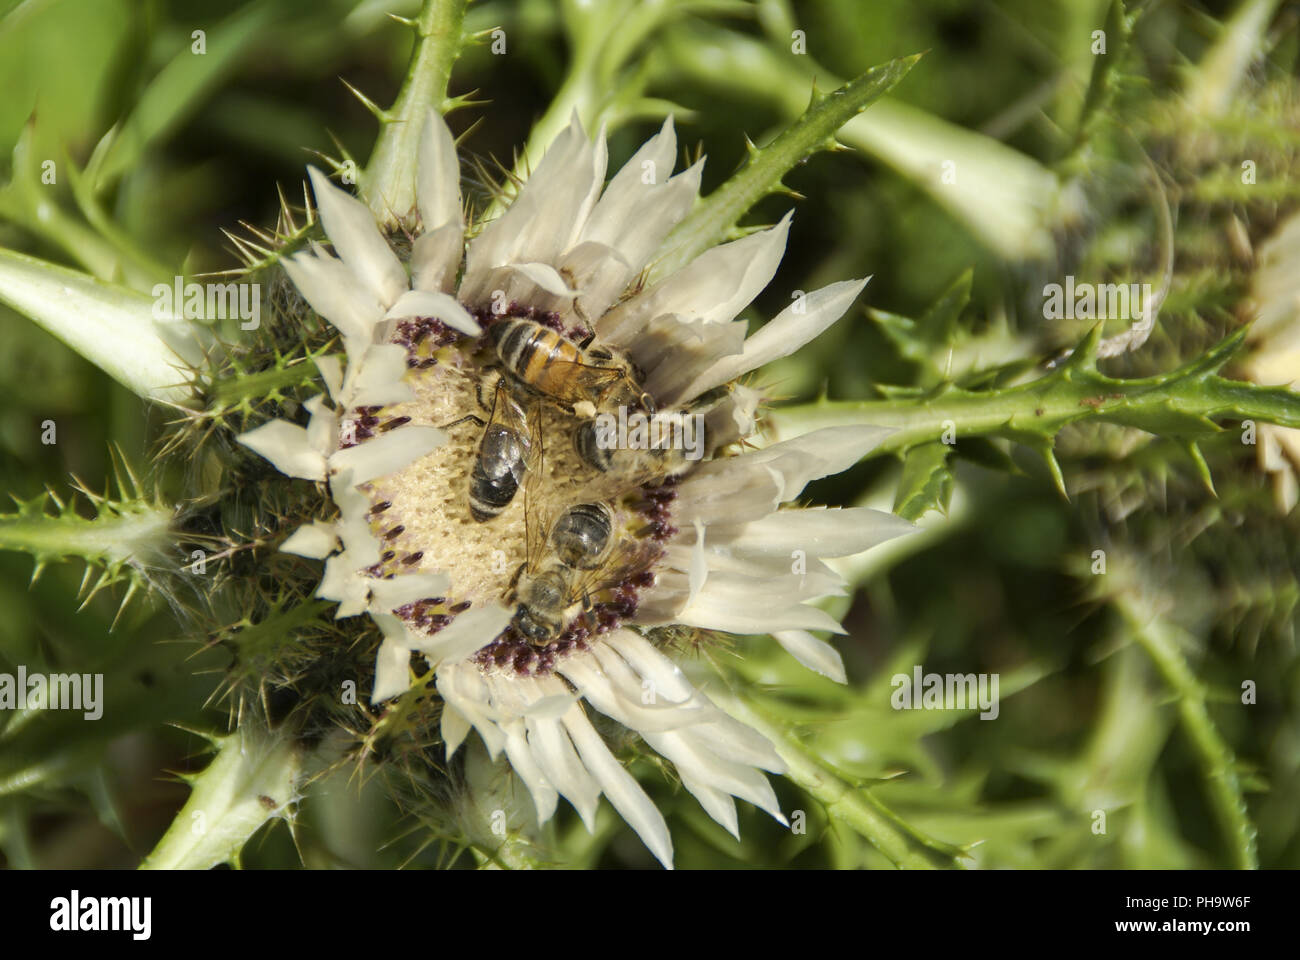 Bees sitting on silver thistle, Swabian Alps, Germany Stock Photo